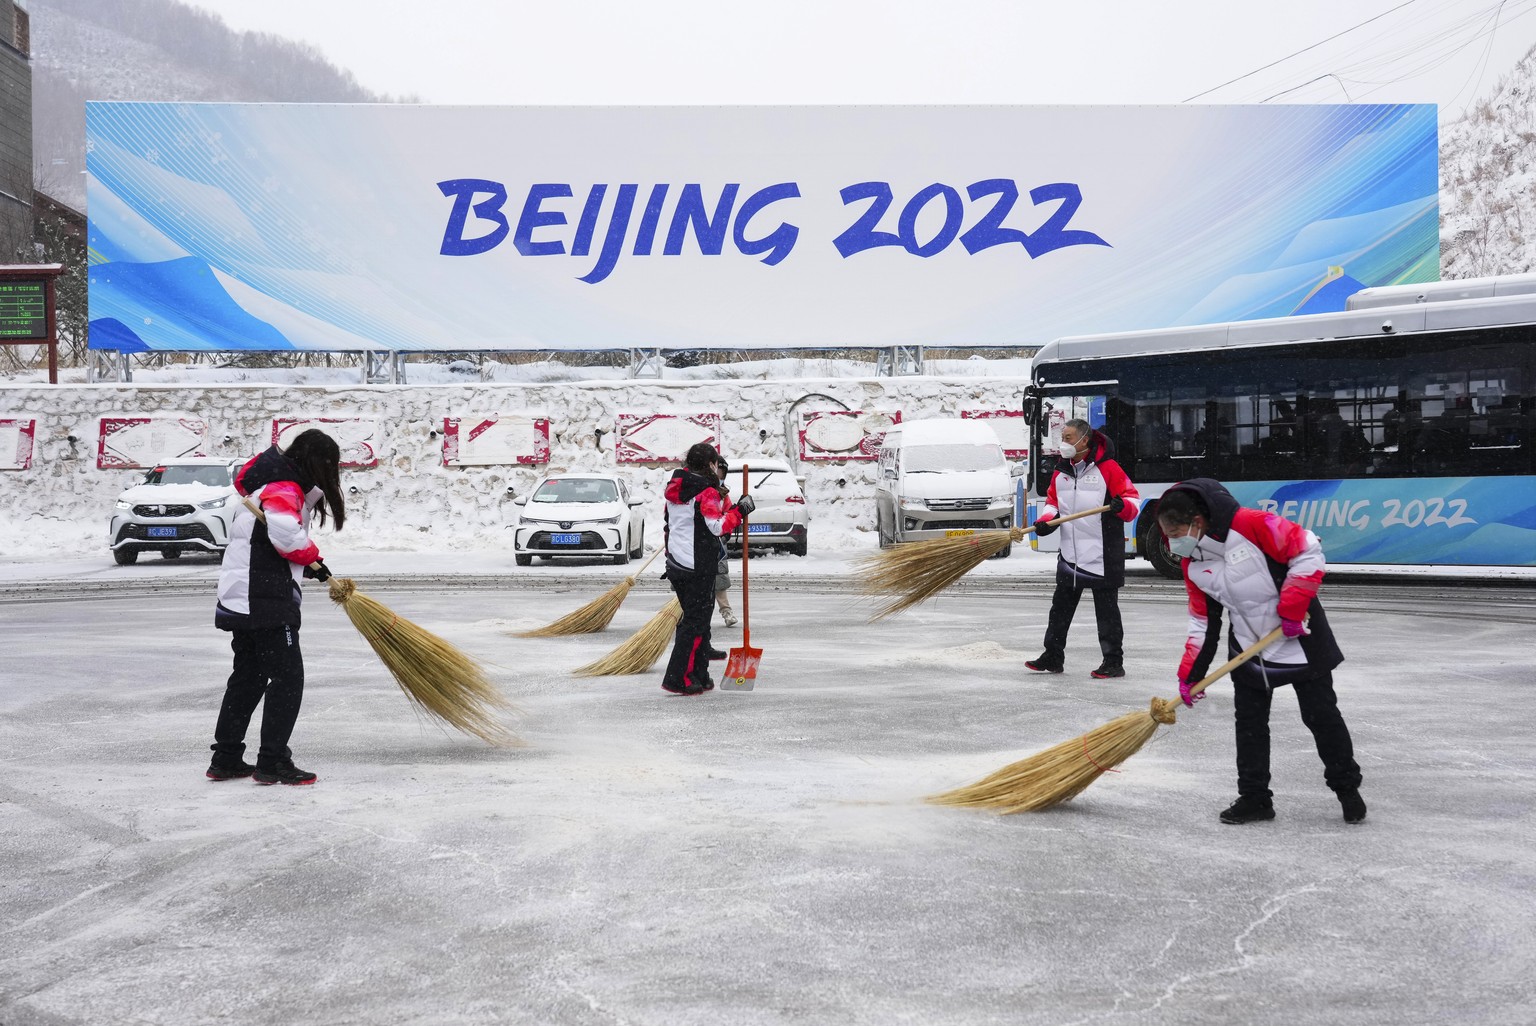 Volunteers clear snow from the bus terminal at the Zhangiiakou Media Center during the 2022 Winter Olympics, Sunday, Feb. 13, 2022, in Zhangjiakou, China. (Sean Kilpatrick/The Canadian Press via AP)